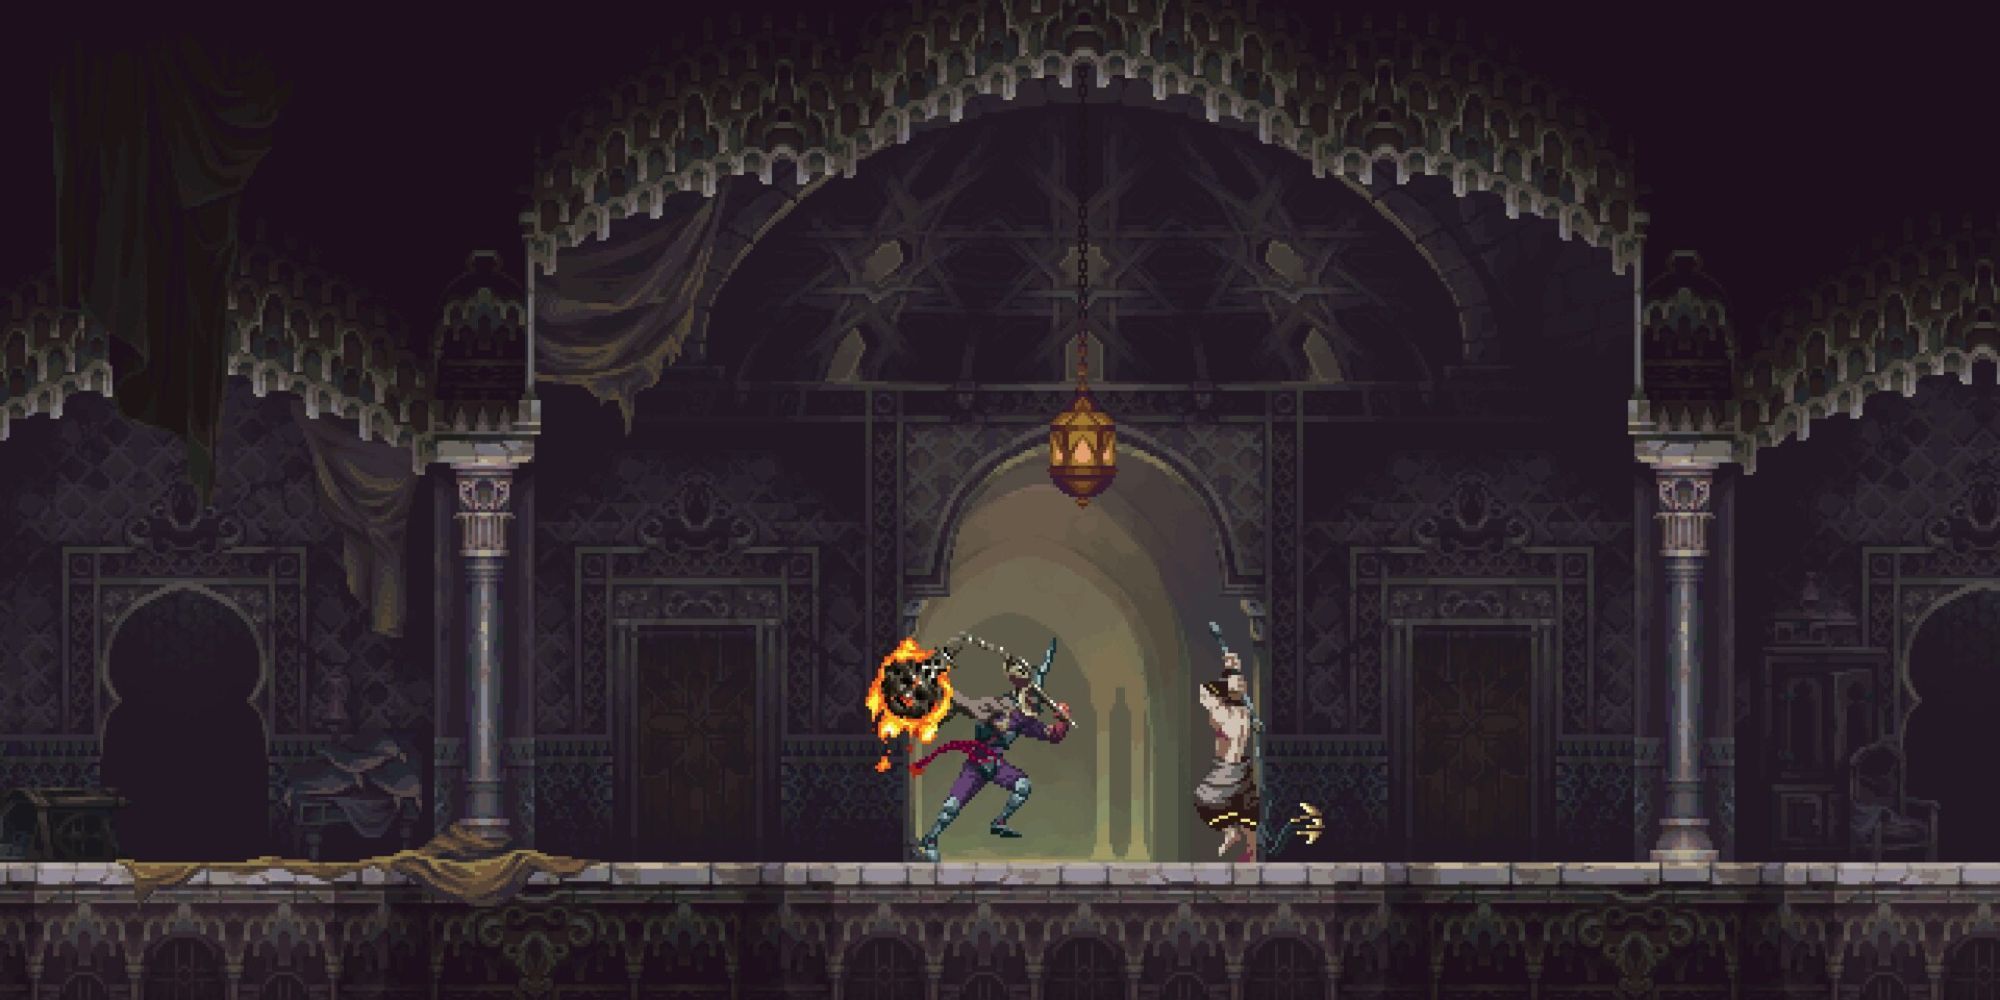 A player attacking an enemy in Blasphemous 2